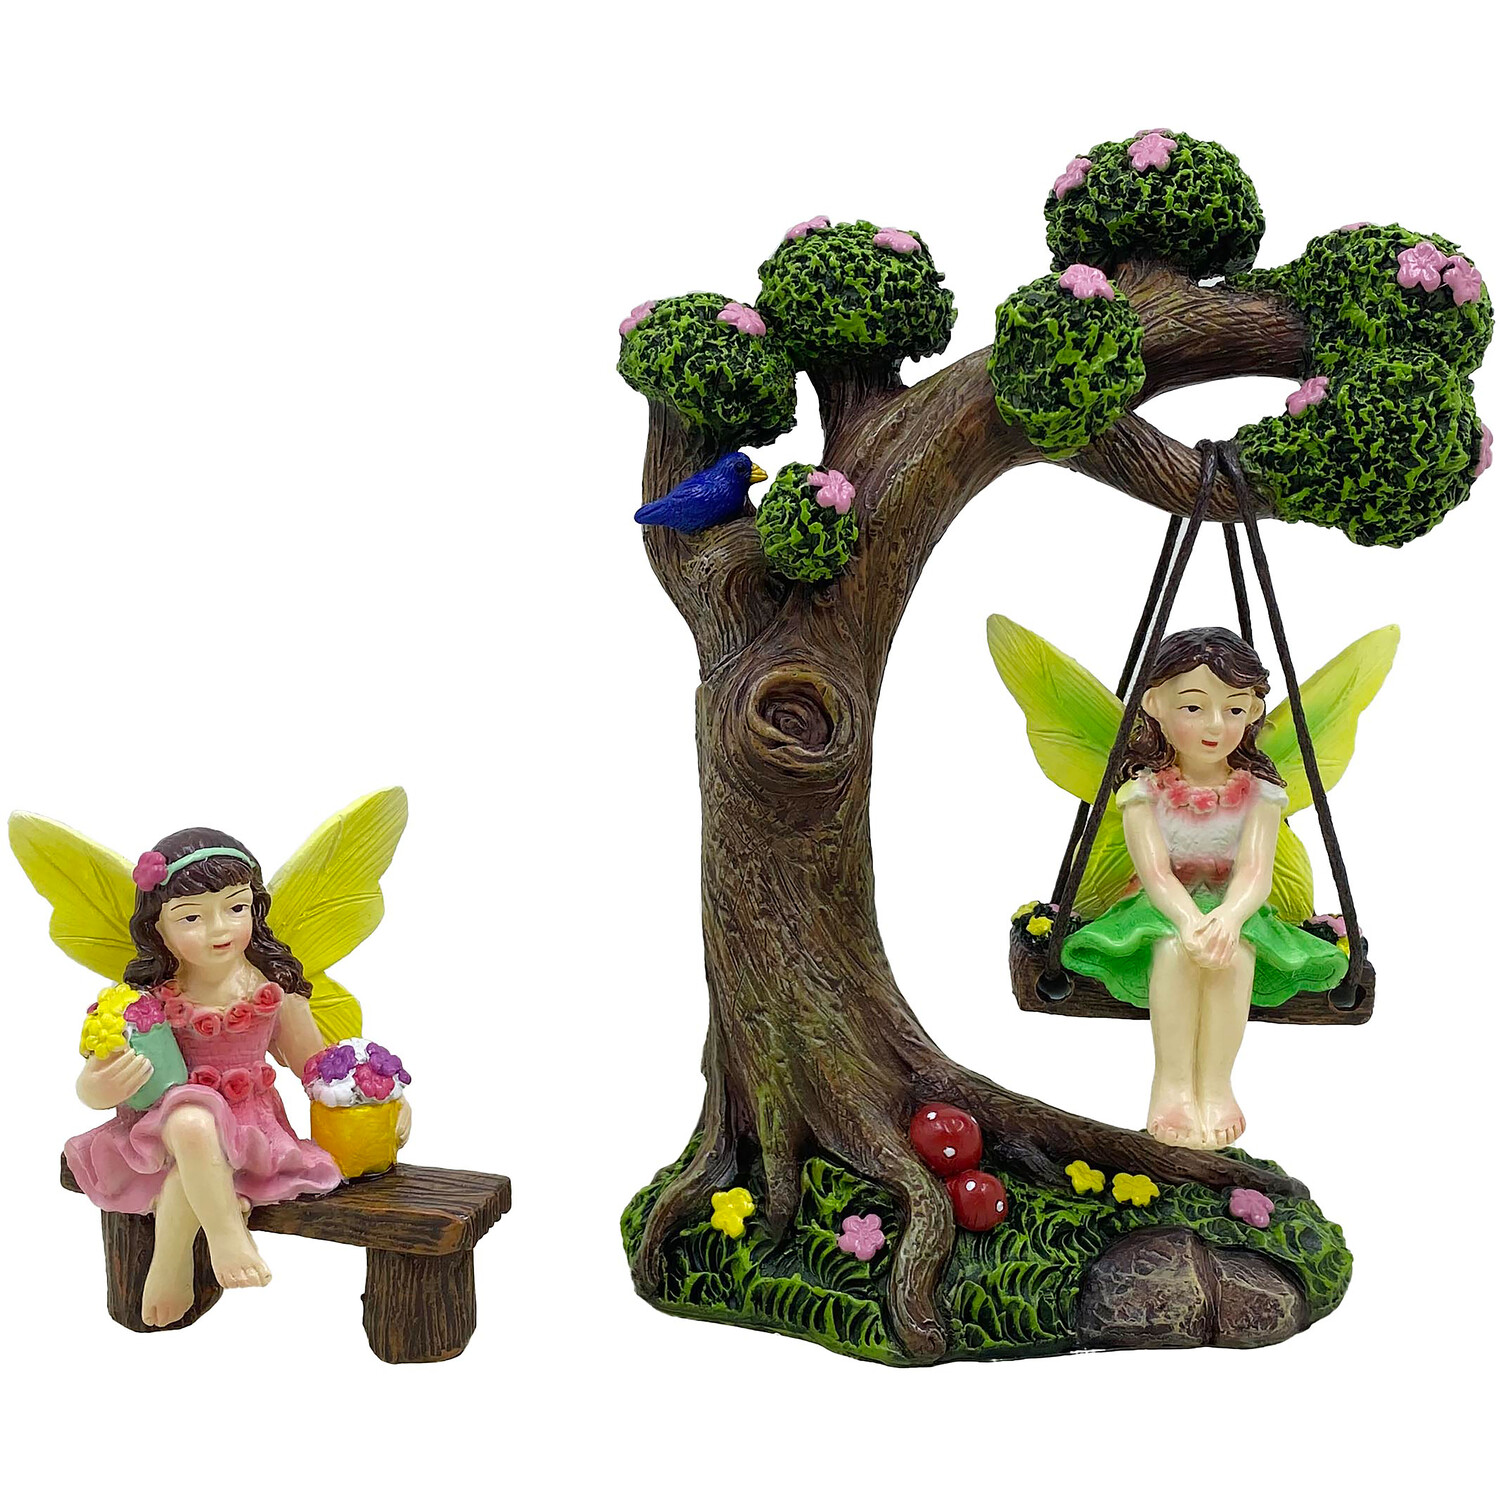 Fairy on Bench and Swing Ornament Image